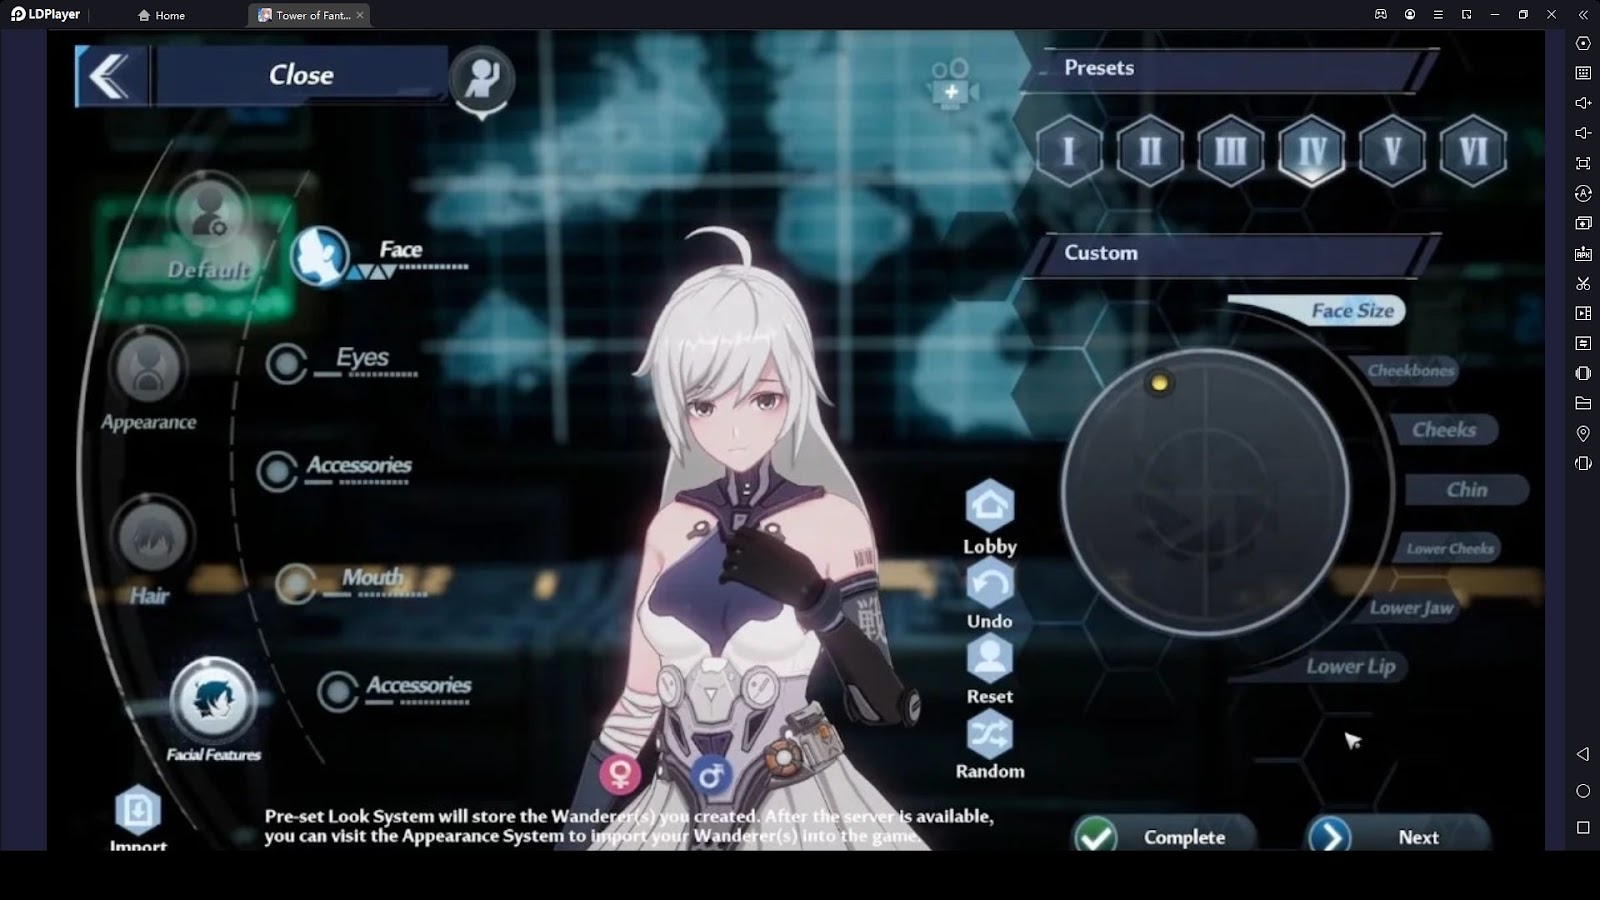 Tower of Fantasy: How to download, what platforms is it on, and how to  customise characters